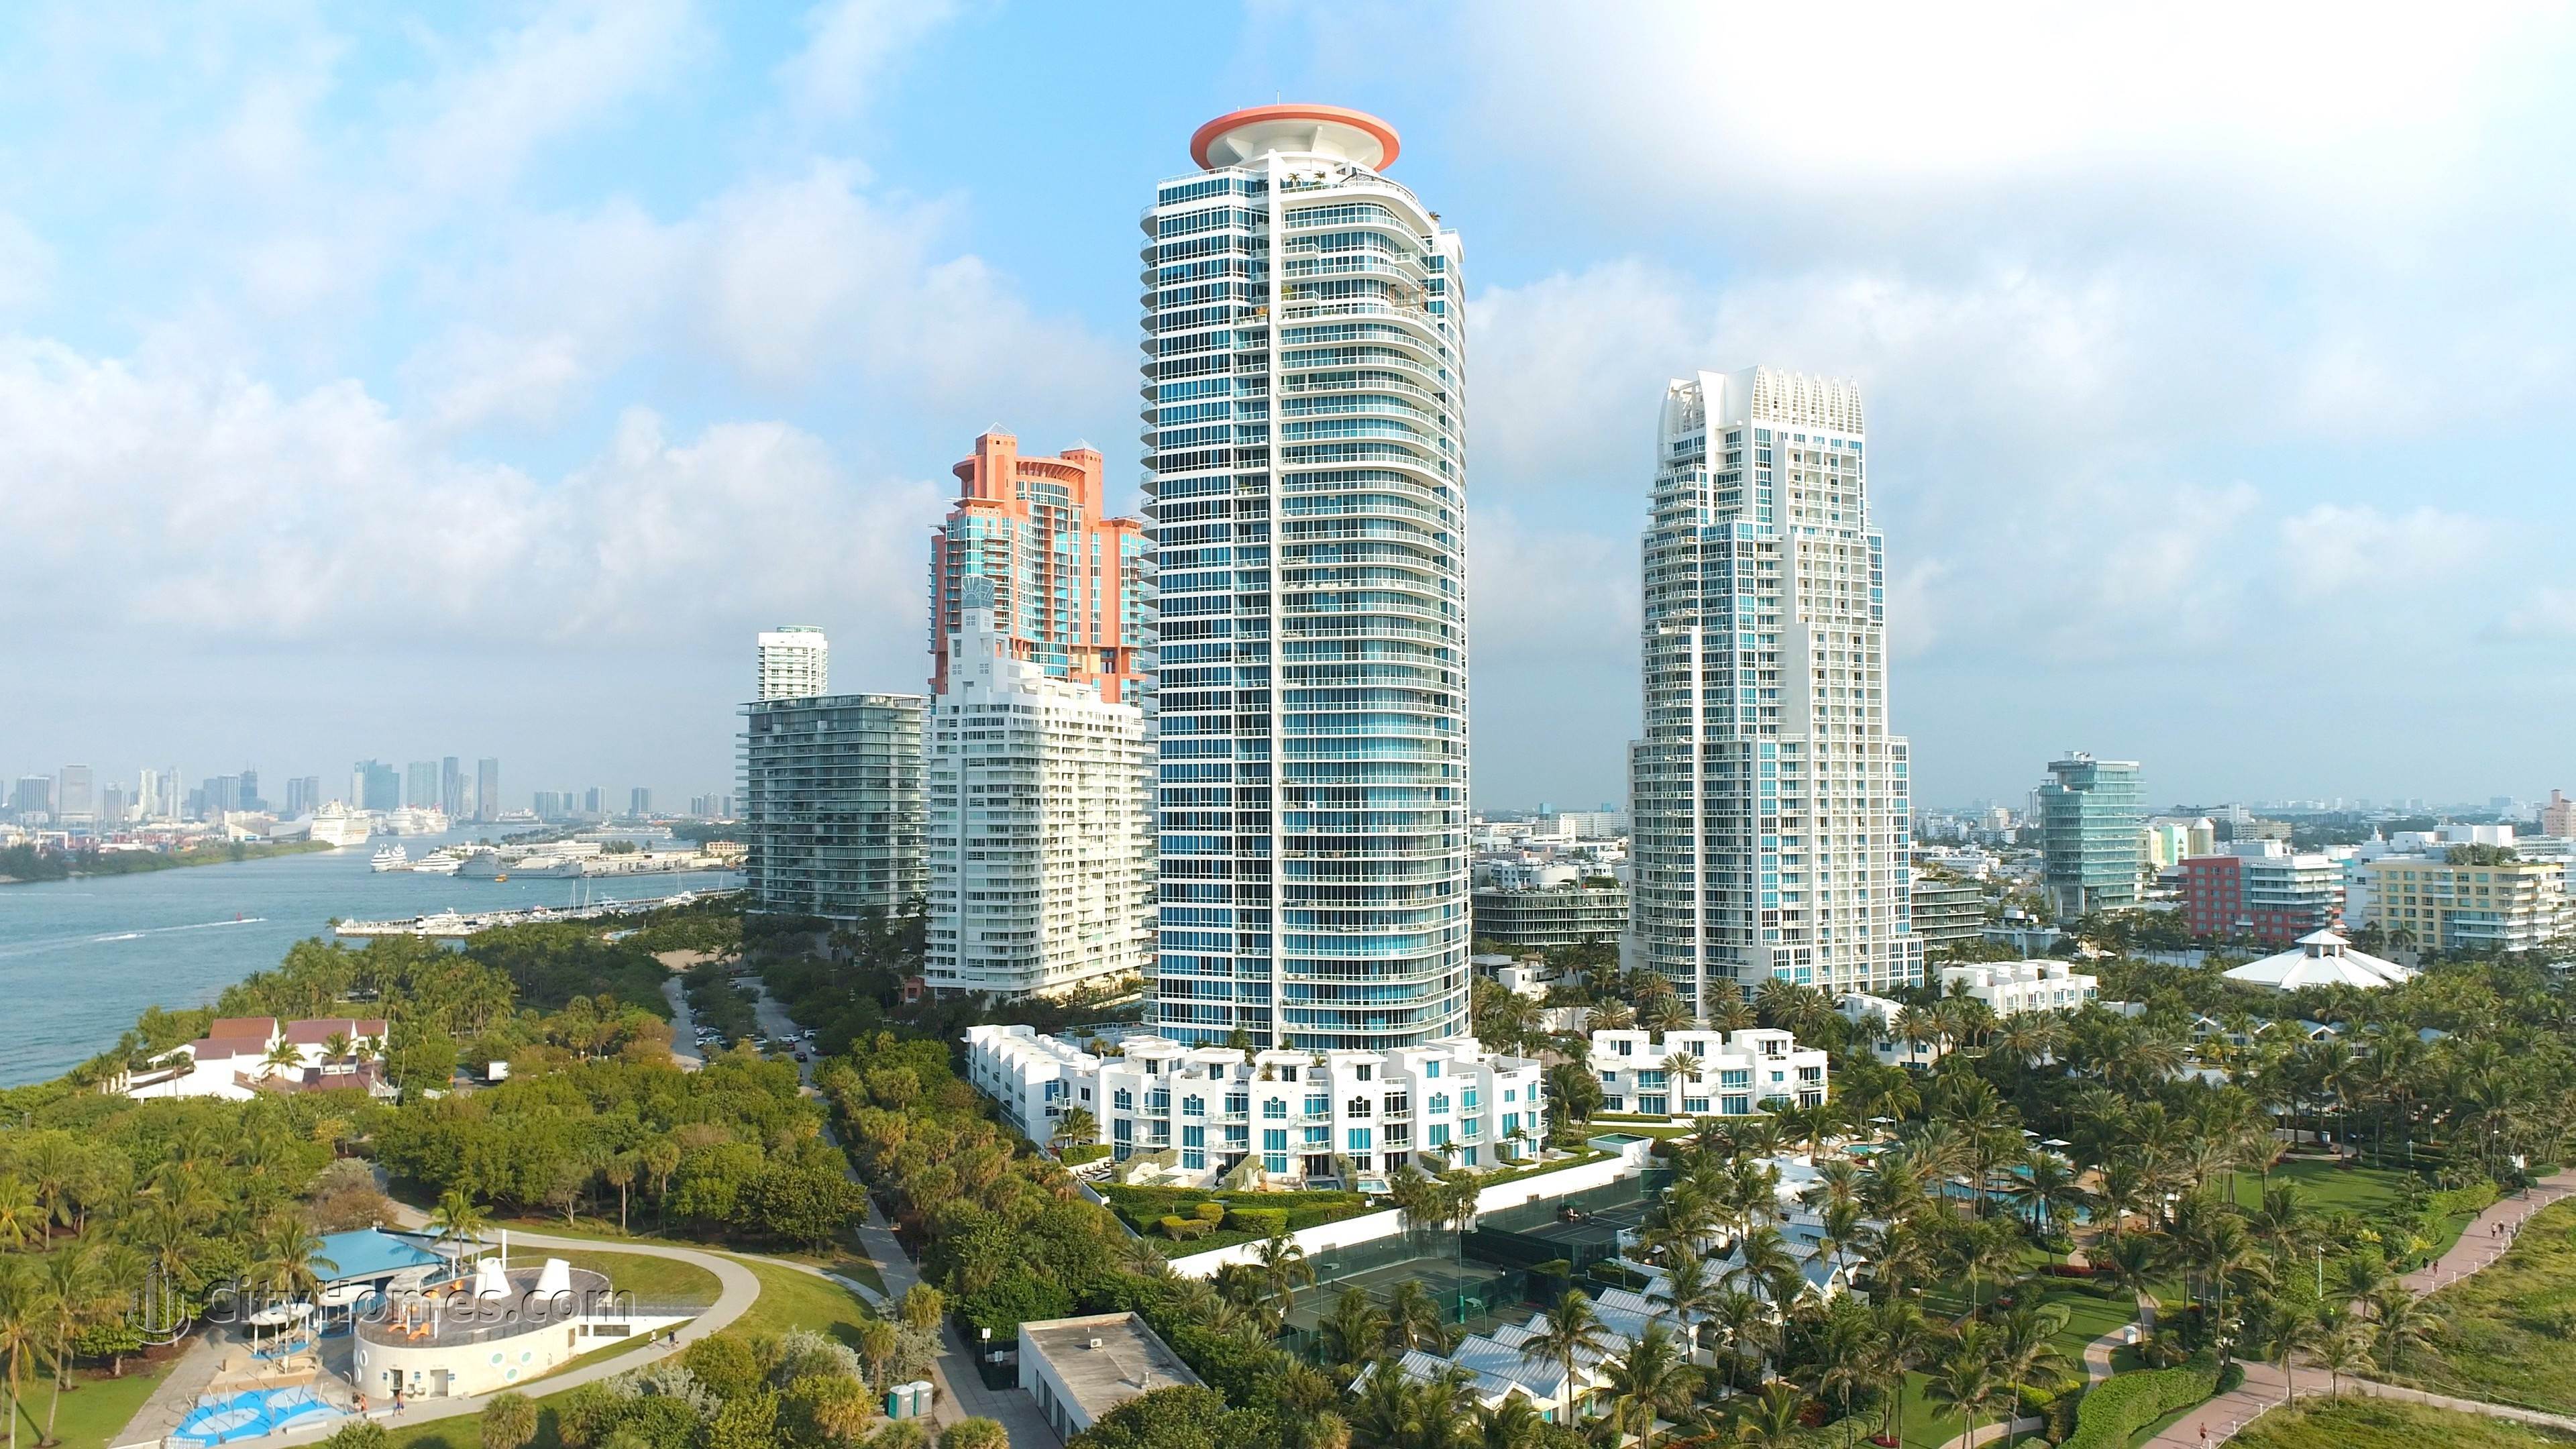 2. CONTINUUM SOUTH TOWER building at 100 S Pointe Dr., Miami Beach, FL 33139